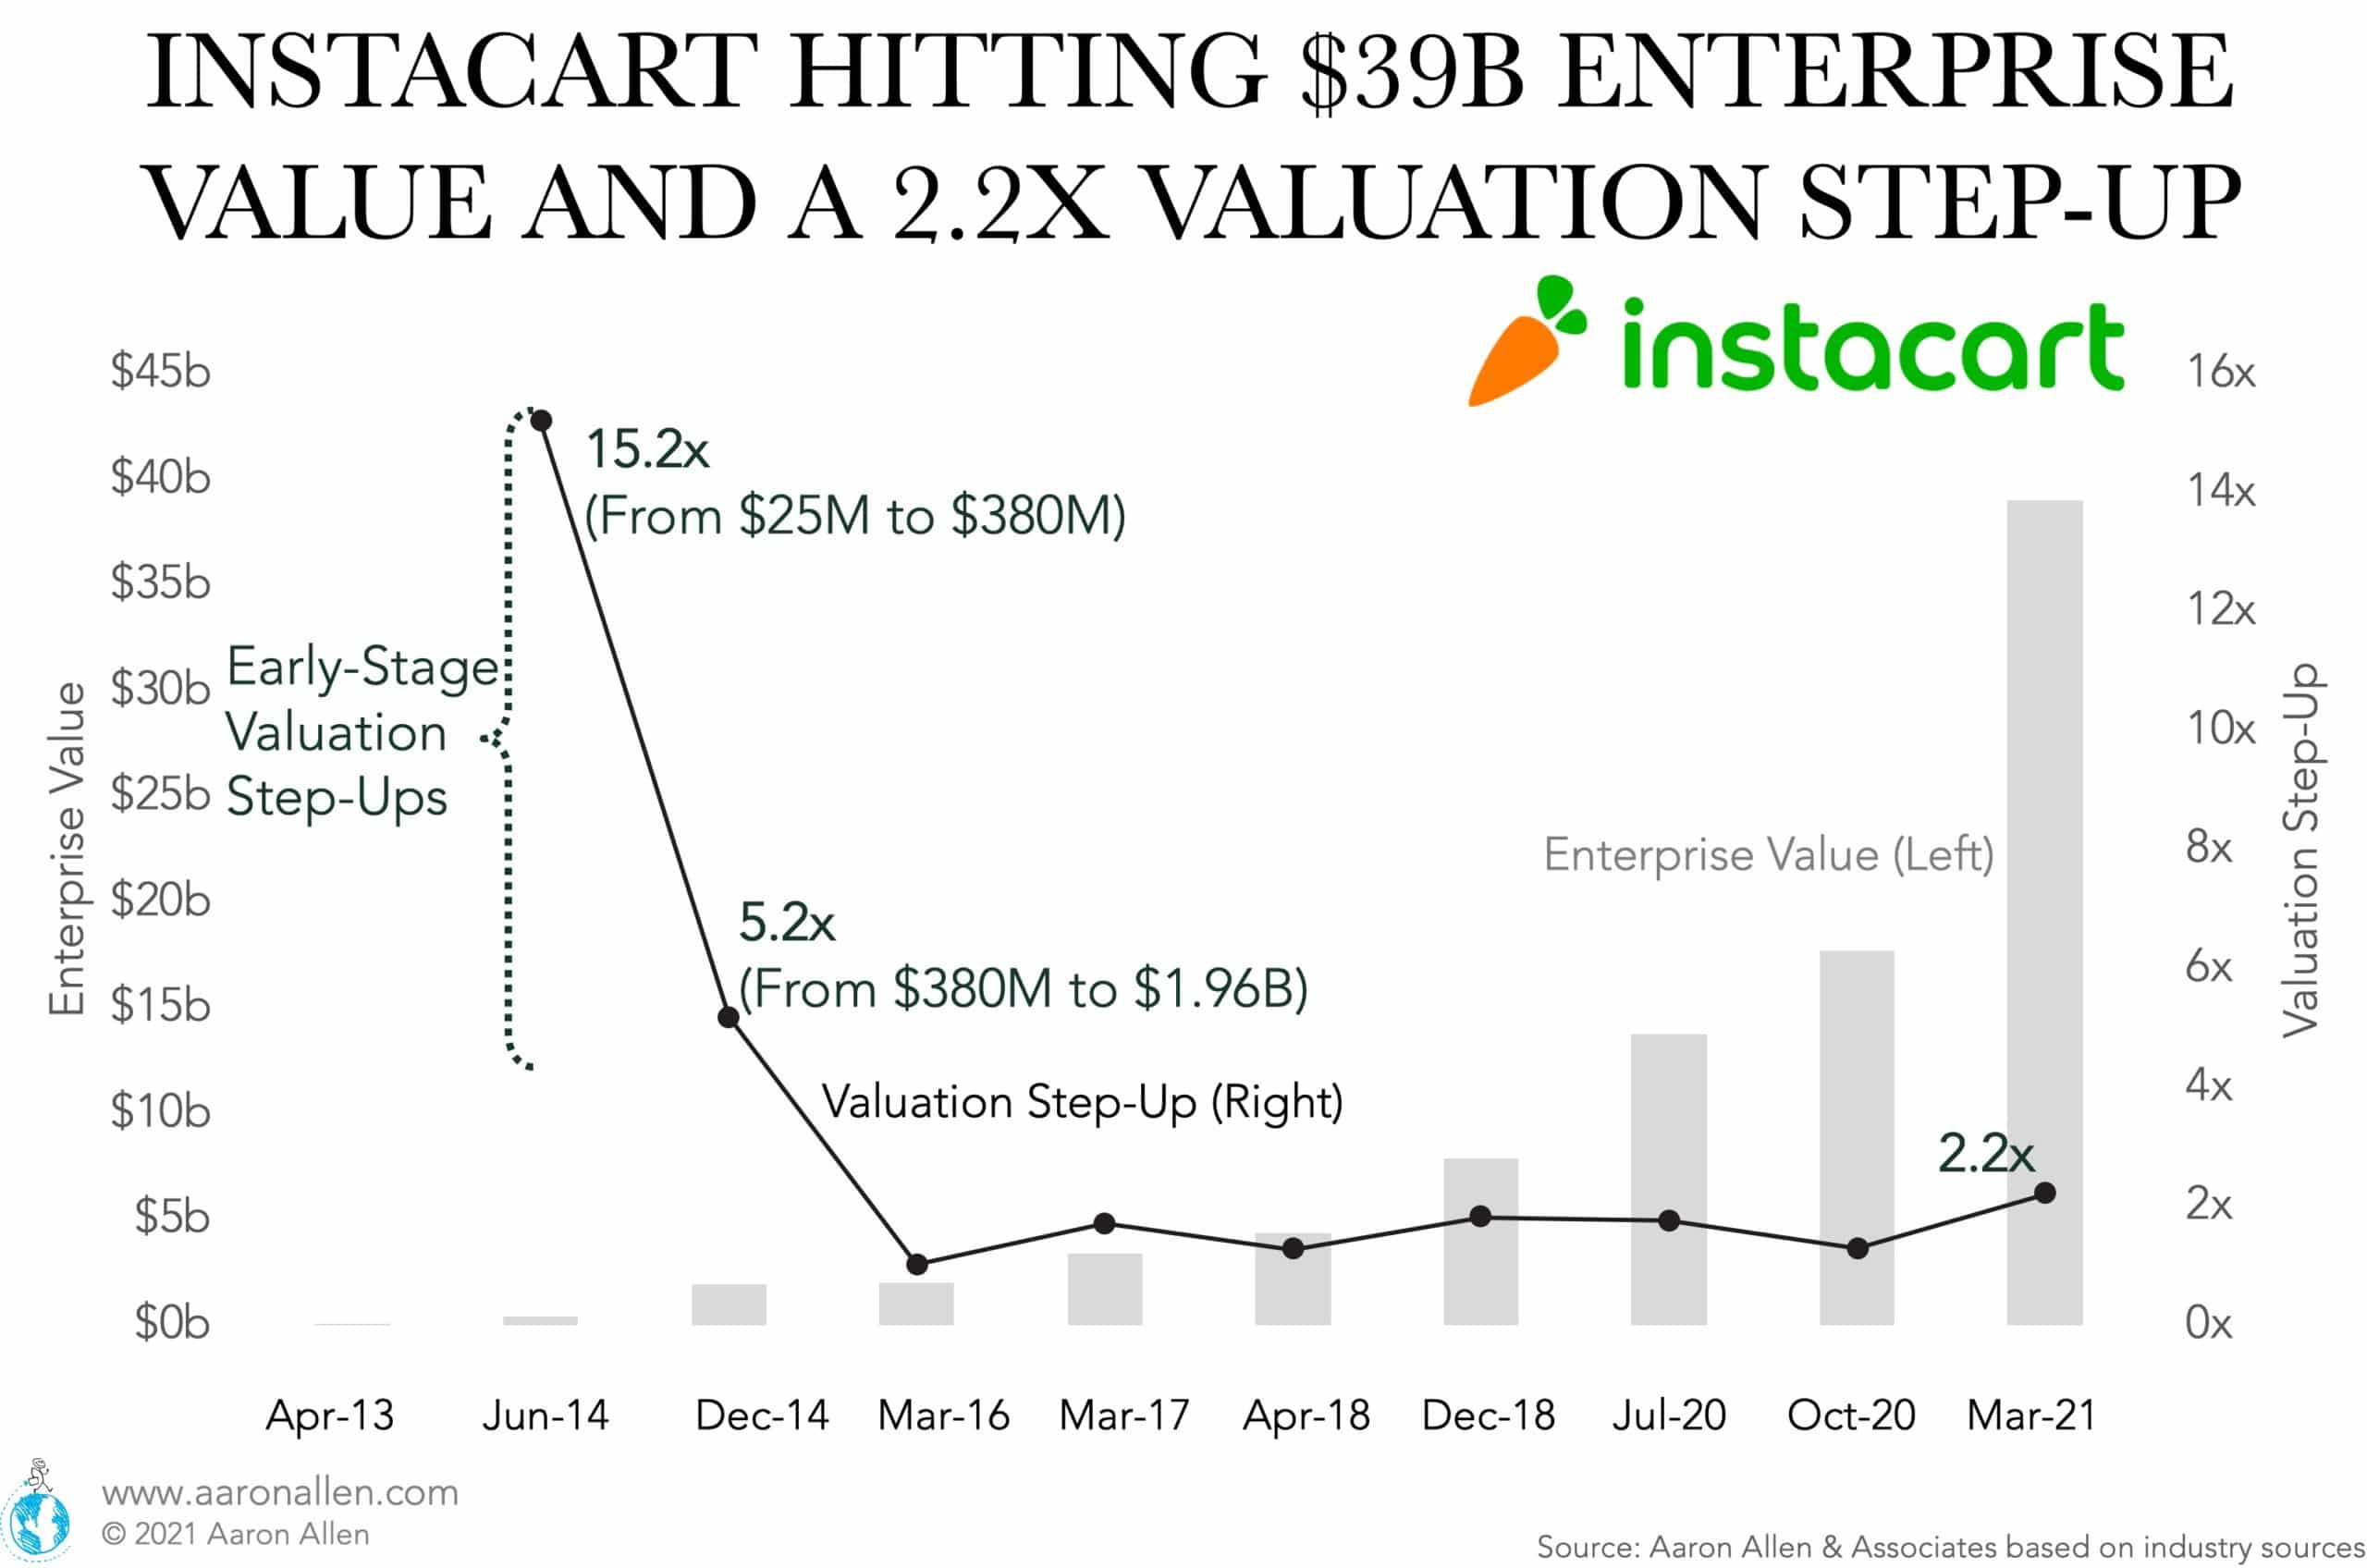 Instacart’s enterprise value has grown at an average of 249% between rounds (meaning the value multiplied by 1,560 times in 8 years). During the last funding round, the EV doubled (more than impressive when considering this is in the billions of dollars).  However, the valuation step-ups of the initial funding rounds also show how investors can benefit at the early stages. The valuation step-up in early 2014 was 15.2x (from $25M to $380M) and 5.2x in late 2014 (from $380M to $1.96B). Valuation step-ups stabilized at around 1.5x after that (until the 2.2x jump in the last round of March 2021). Instacart is not a foodservice technology company, but it’s an interesting adjacent case study. Investors are going to have to get in early if they want to participate in these big valuation wins. In many cases, the revenue and EV acceleration will be like going from 0-60 mph in less than 2.4 seconds (many won’t believe this could happen and will therefore miss the opportunity). We are proud we have found a couple of gems with a great shot at becoming the most valuable foodservice tech in the world.